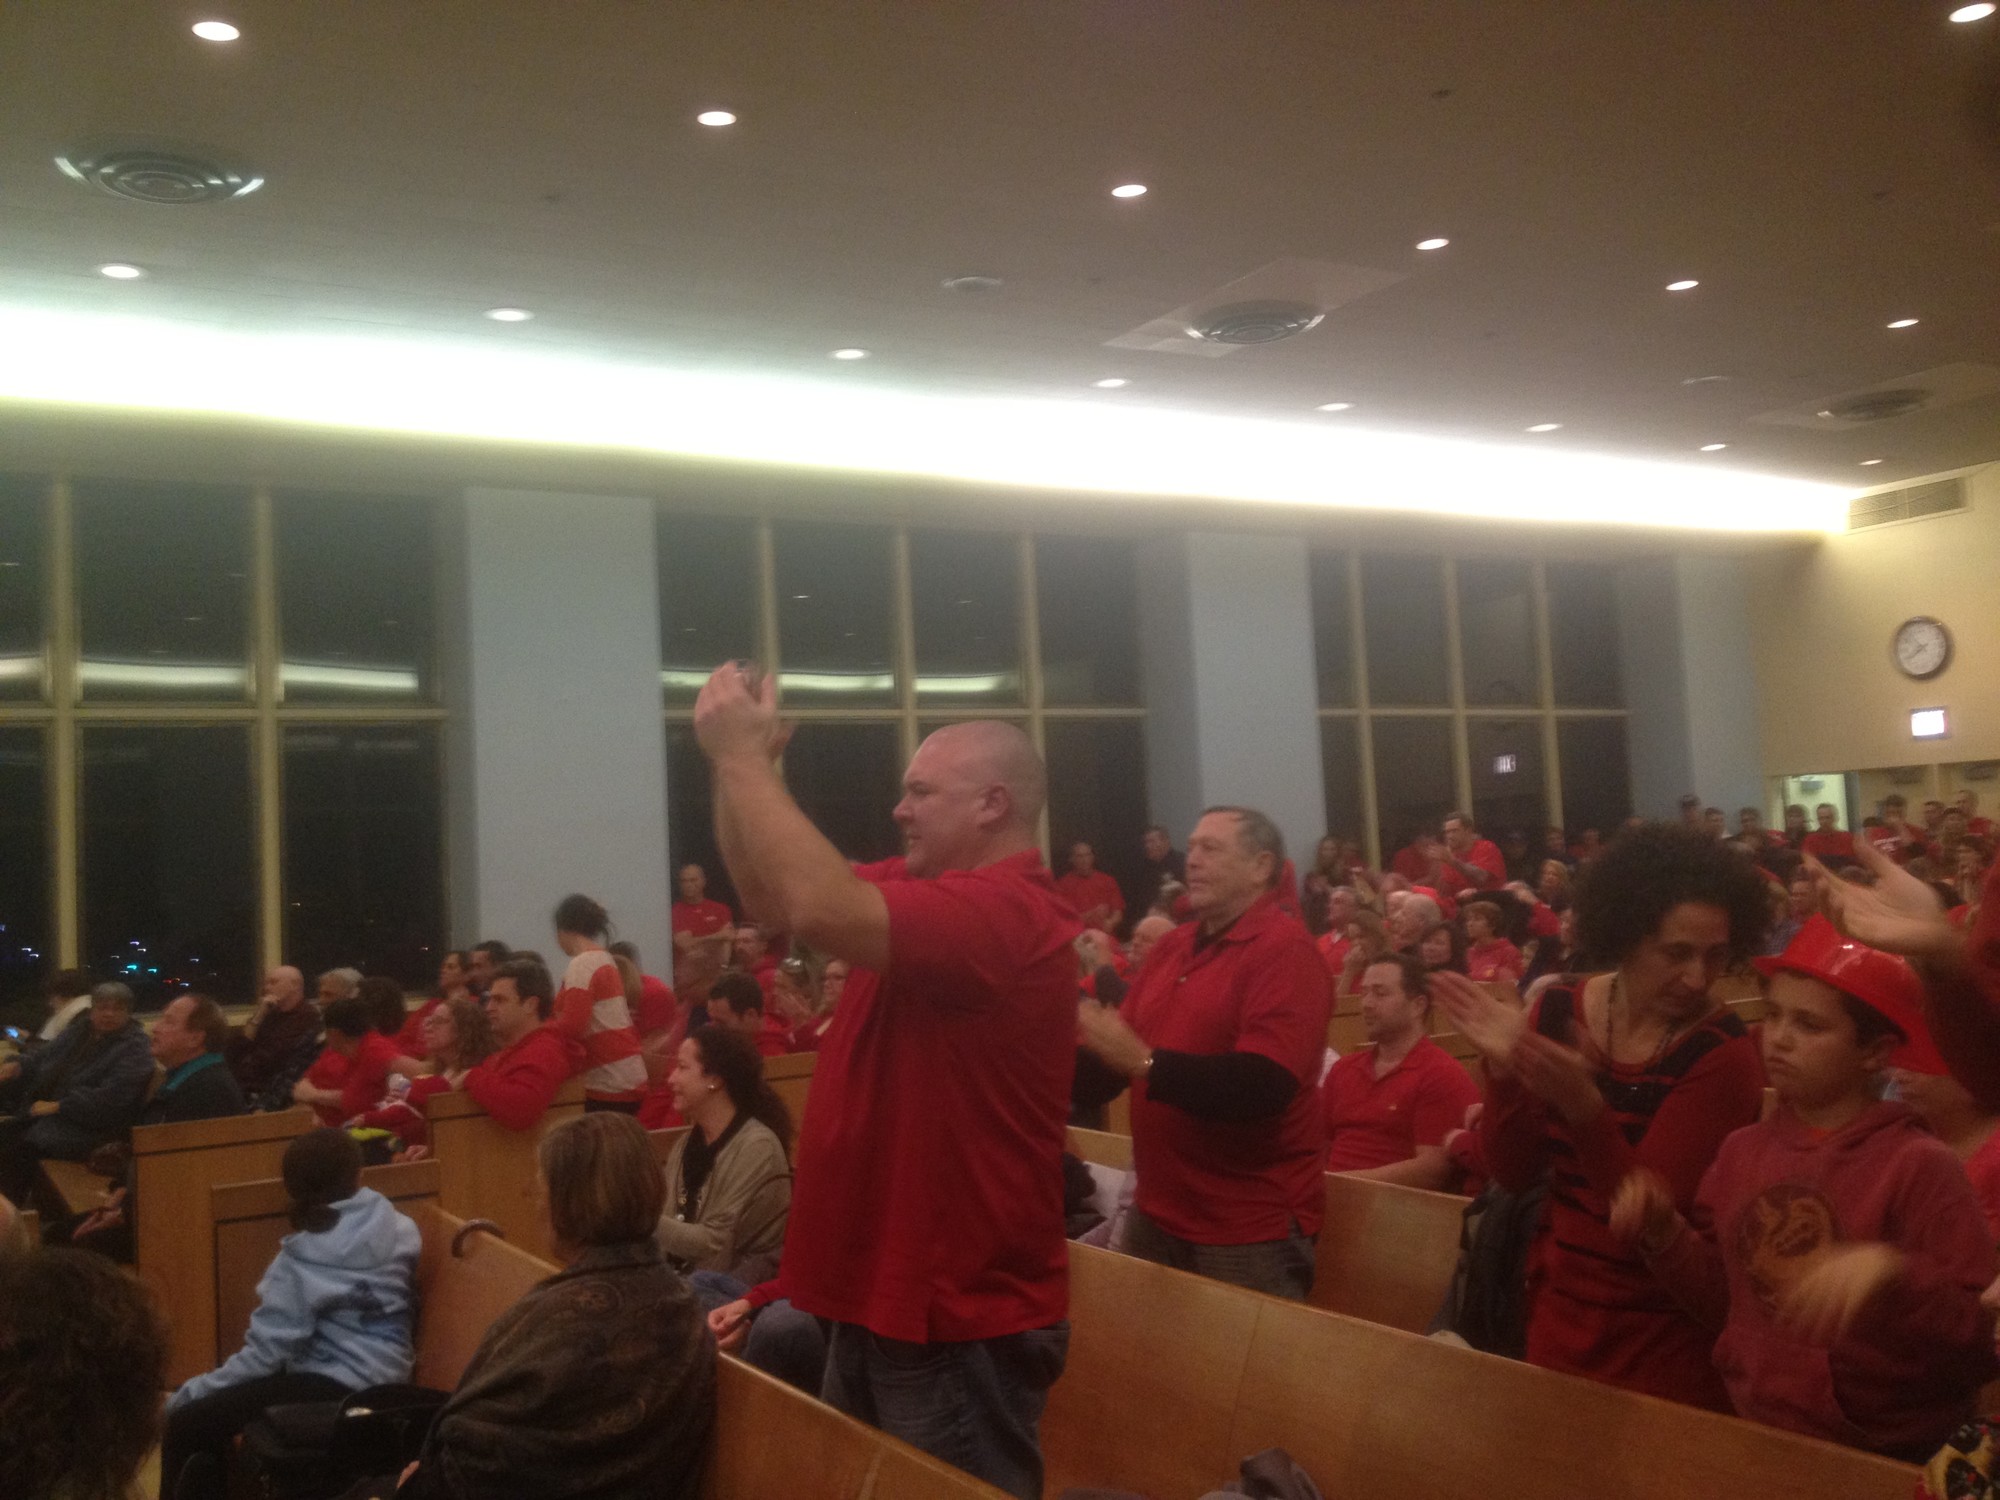 Chris Gormley cheered on fellow union members and supporters opposing the layoffs.